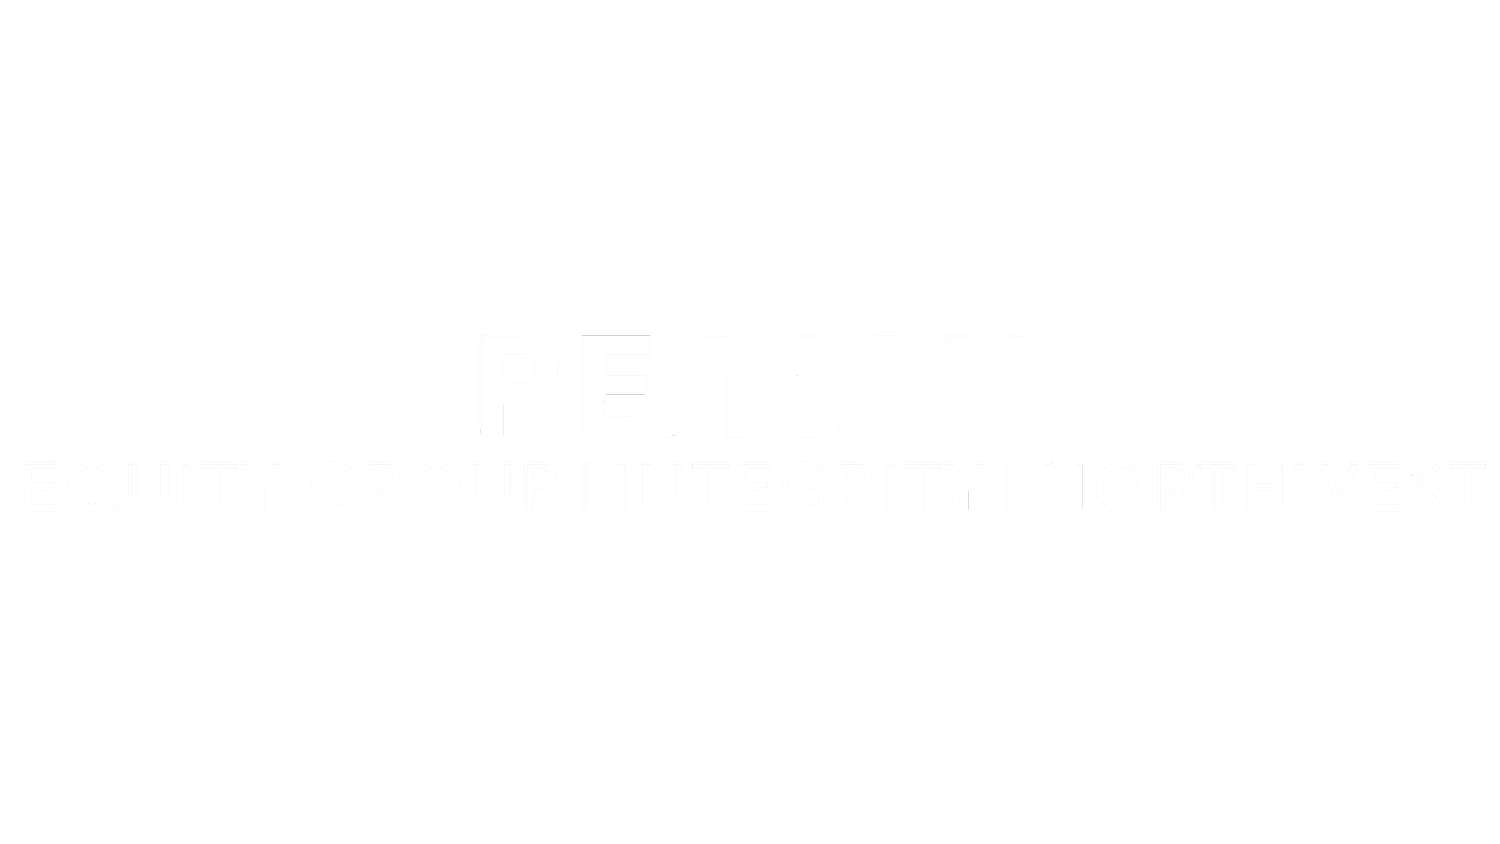 RE/MAX Equity Group | Integrity | Northwest